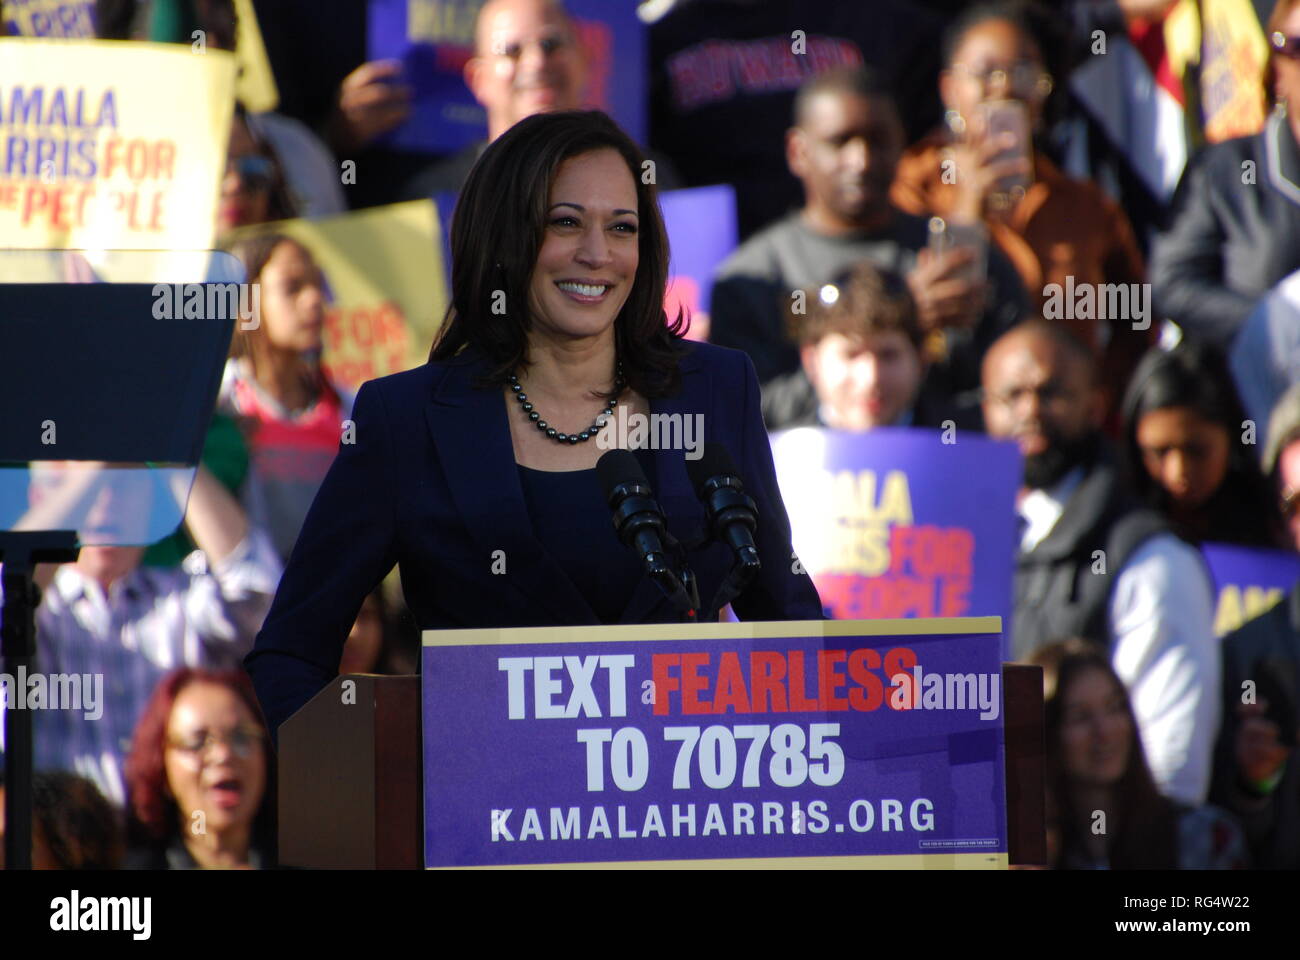 Oakland, California, USA. 27th Jan. 2019. U.S. Sen. Kamala Harris speaks during her first campaign rally outside Oakland City Hall on Jan. 27. Harris announced she is running for President of the United States on Jan. 21. Credit: Scott Morris/Alamy Live News Stock Photo